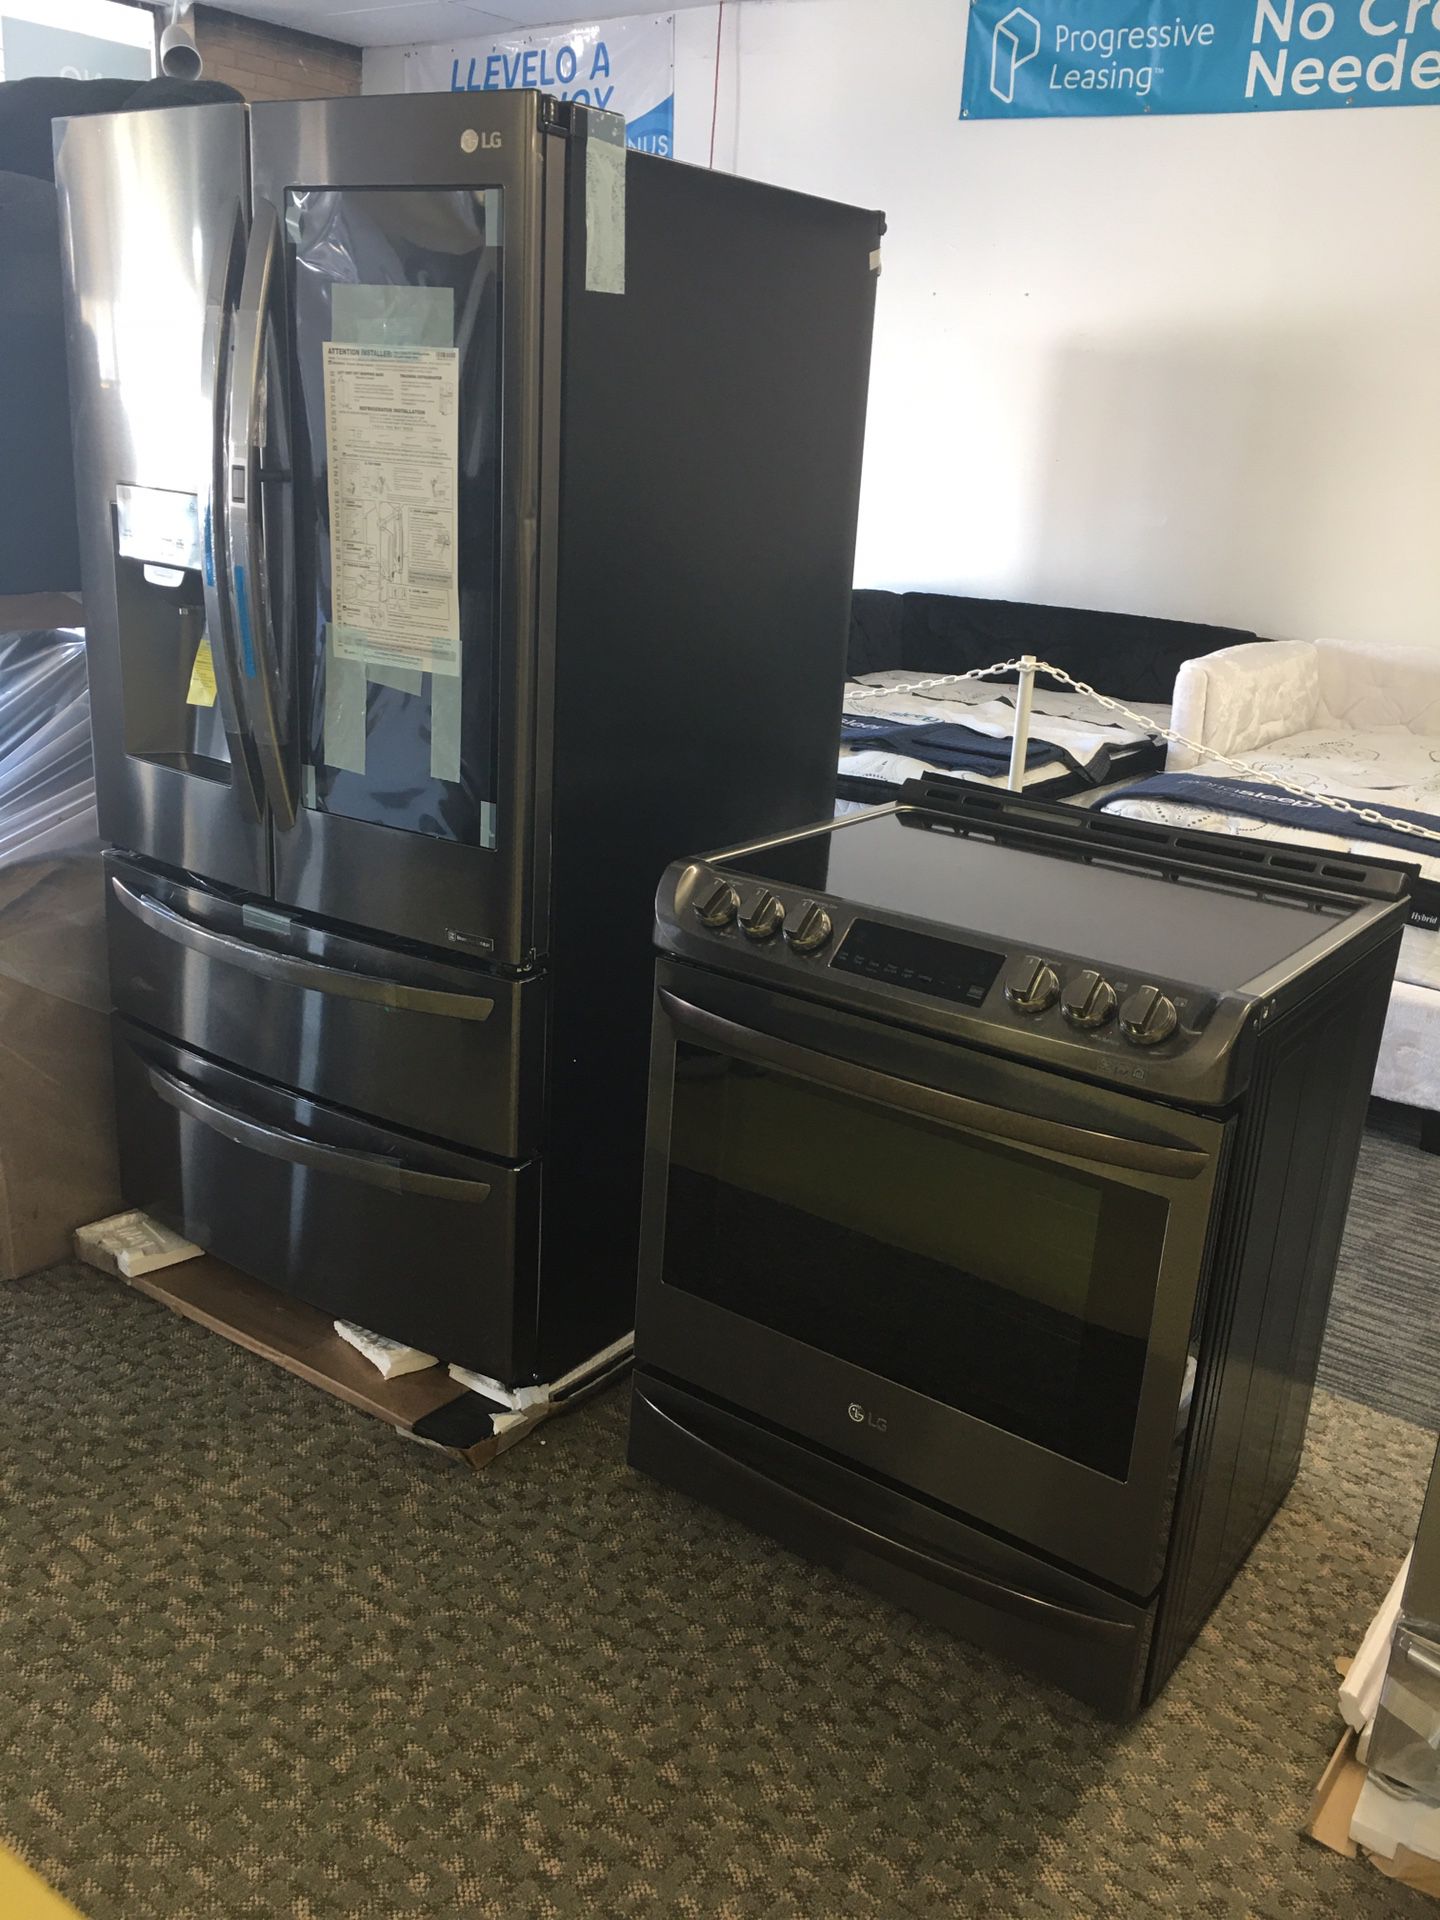 LG Set brand New black Stainless Steel With Chosecase With Warranty No Credit Needed Just $54 The Down Payment Cash Price $4,000